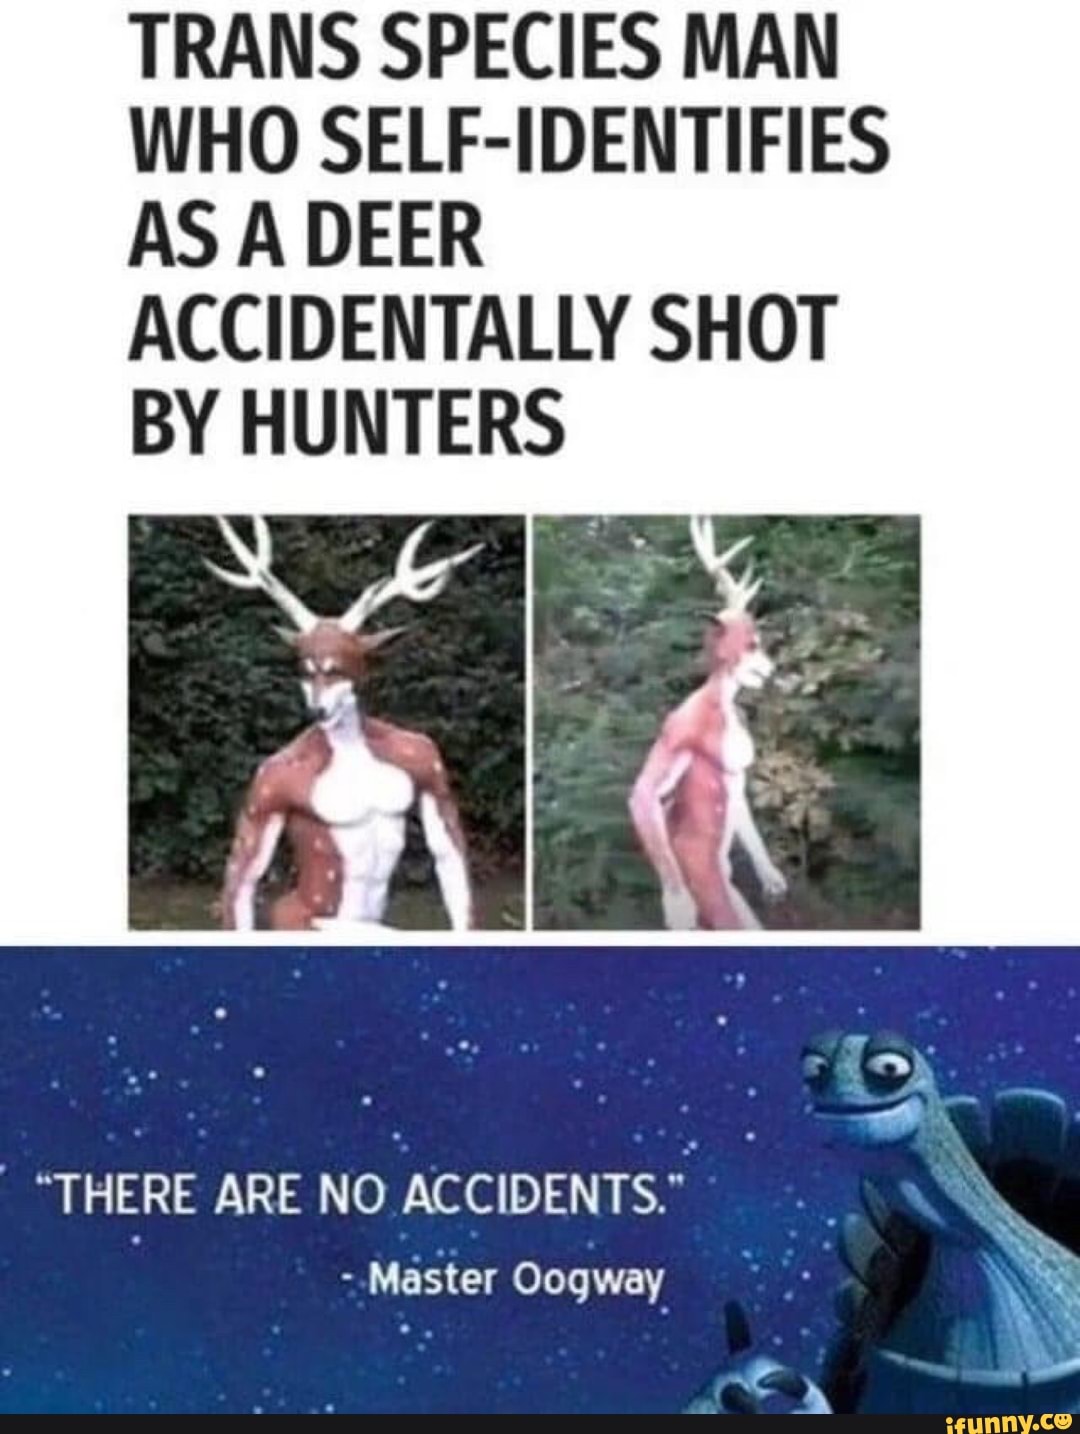 Transspecies Porn - TRANS SPECIES MAN WHO SELF-IDENTIFIES AS A DEER ACCIDENTALLY SHOT BY  HUNTERS \